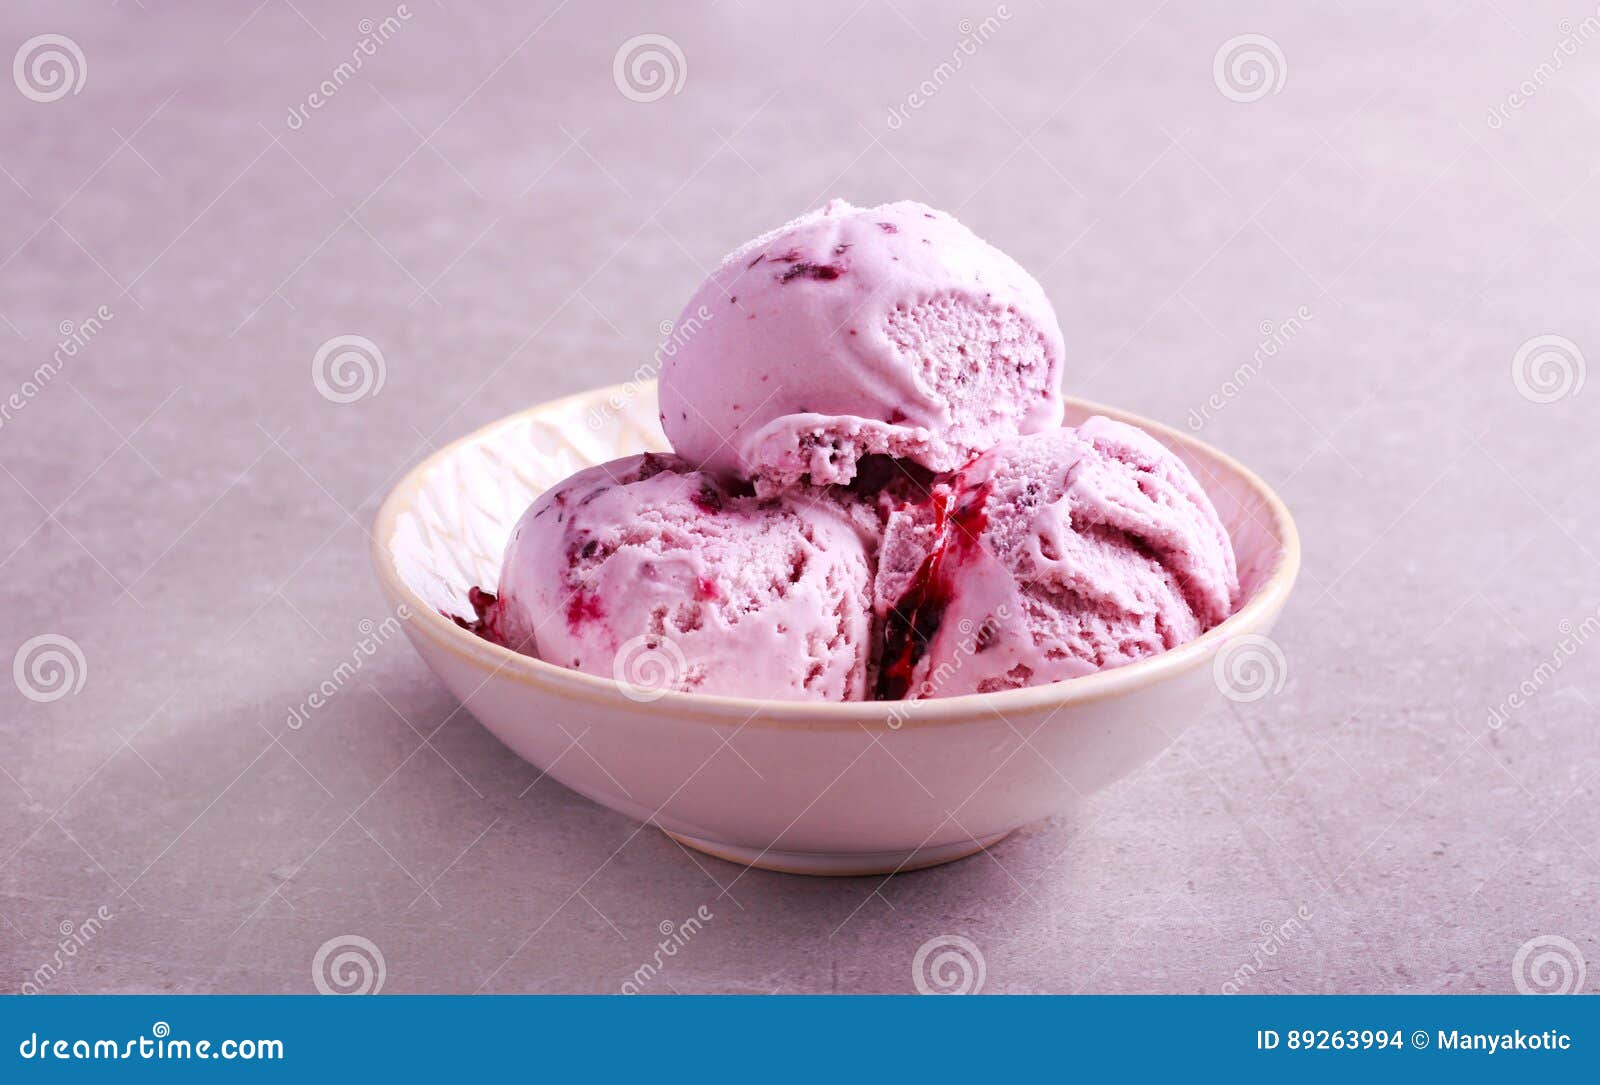 Fruit and Berry Ice Cream Scoops Stock Photo - Image of sweet, pink ...